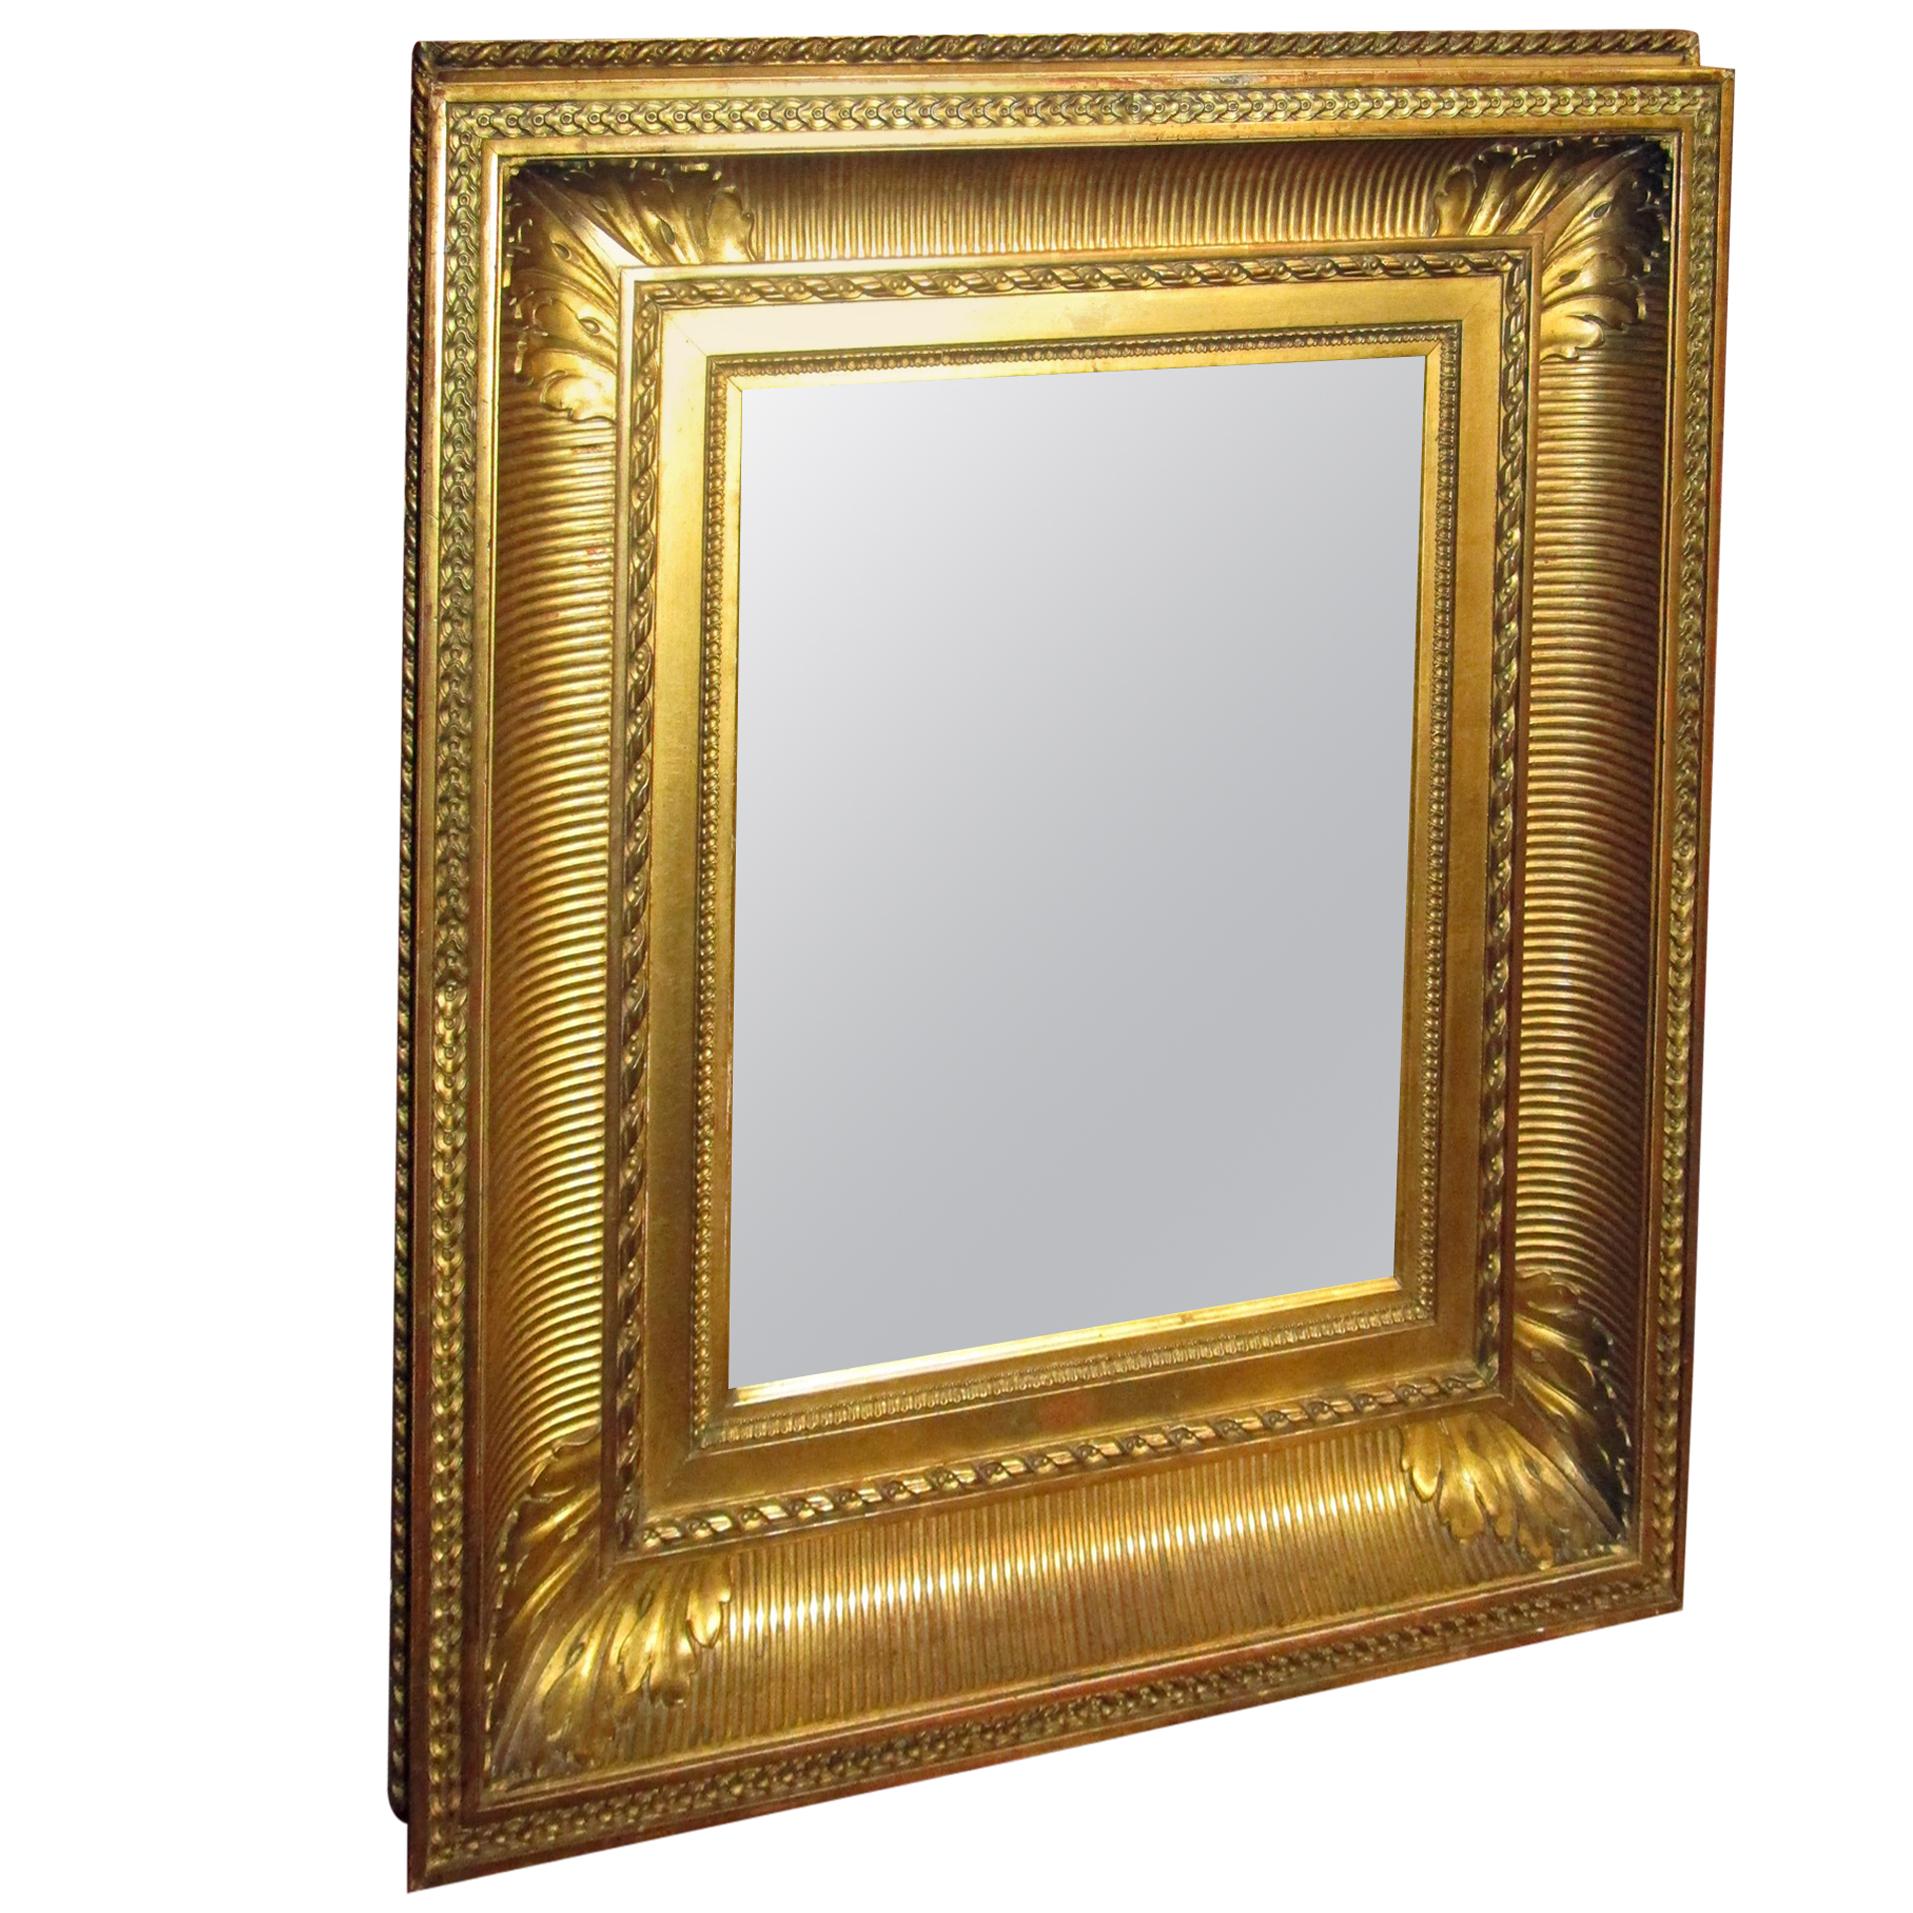 19th century Gold Gilt Wooden Framed Mirror by Charles H. West, London